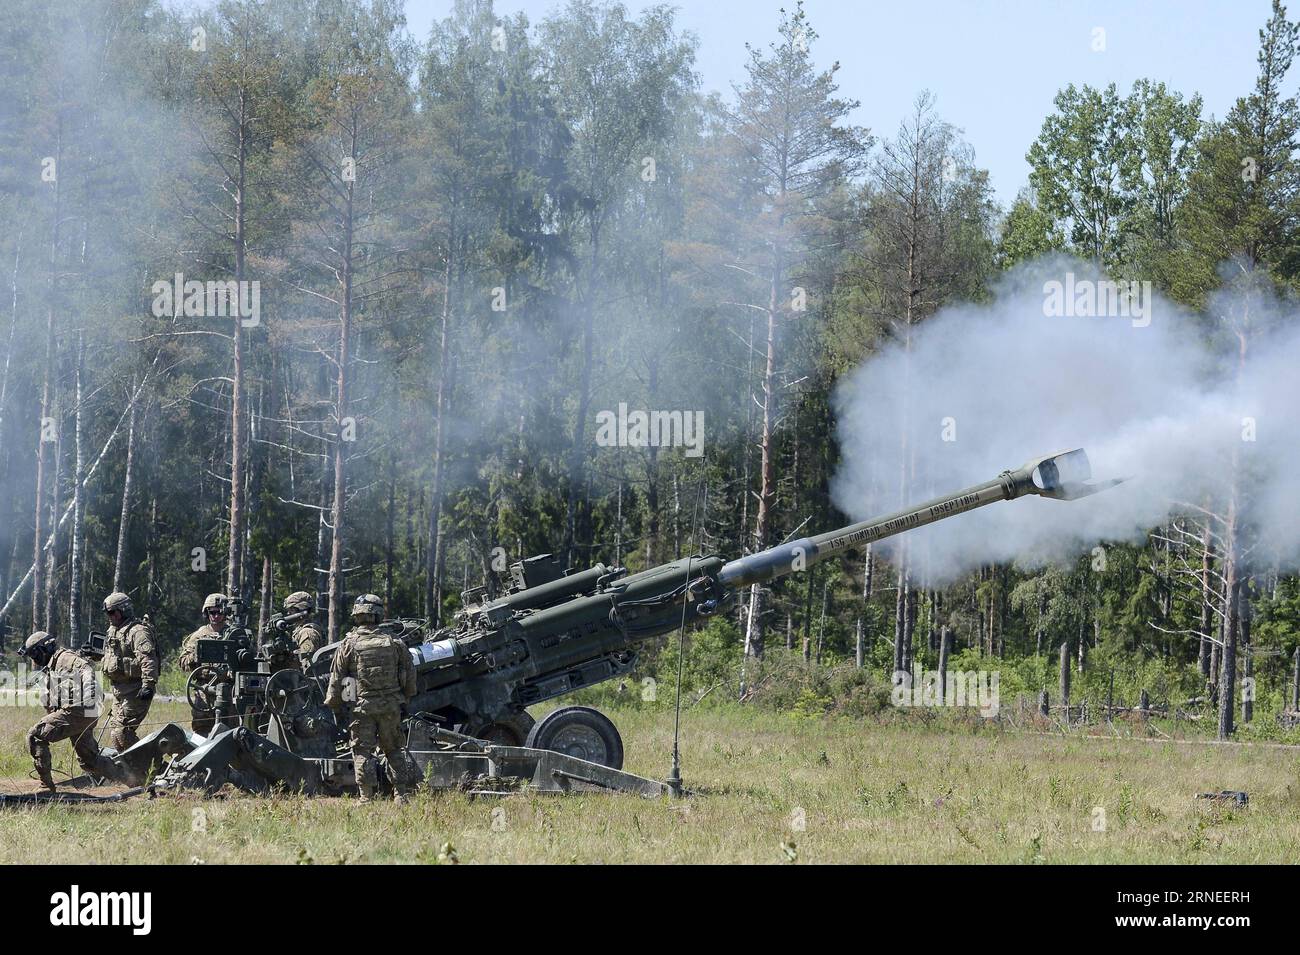 (160621) -- TAPA, June 21, 2016 -- US Army M777 155mm Towed Howitzer shoots during the Saber Strike military exercise at Central pylon in Tapa, Estonia on June 20, 2016. Saber Strike is an annual U.S.-led exercise of land and air forces. ) ESTONIA-TAPA-SABER STRIKE 2016 SergeixStepanov PUBLICATIONxNOTxINxCHN   160621 Tapa June 21 2016 U.S. Army  155mm towed Howitzer Shoots during The Saber Strike Military EXERCISE AT Central Pylon in Tapa Estonia ON June 20 2016 Saber Strike IS to Annual U S Led EXERCISE of Country and Air Forces Estonia Tapa Saber Strike 2016 SergeixStepanov PUBLICATIONxNOTxI Stock Photo